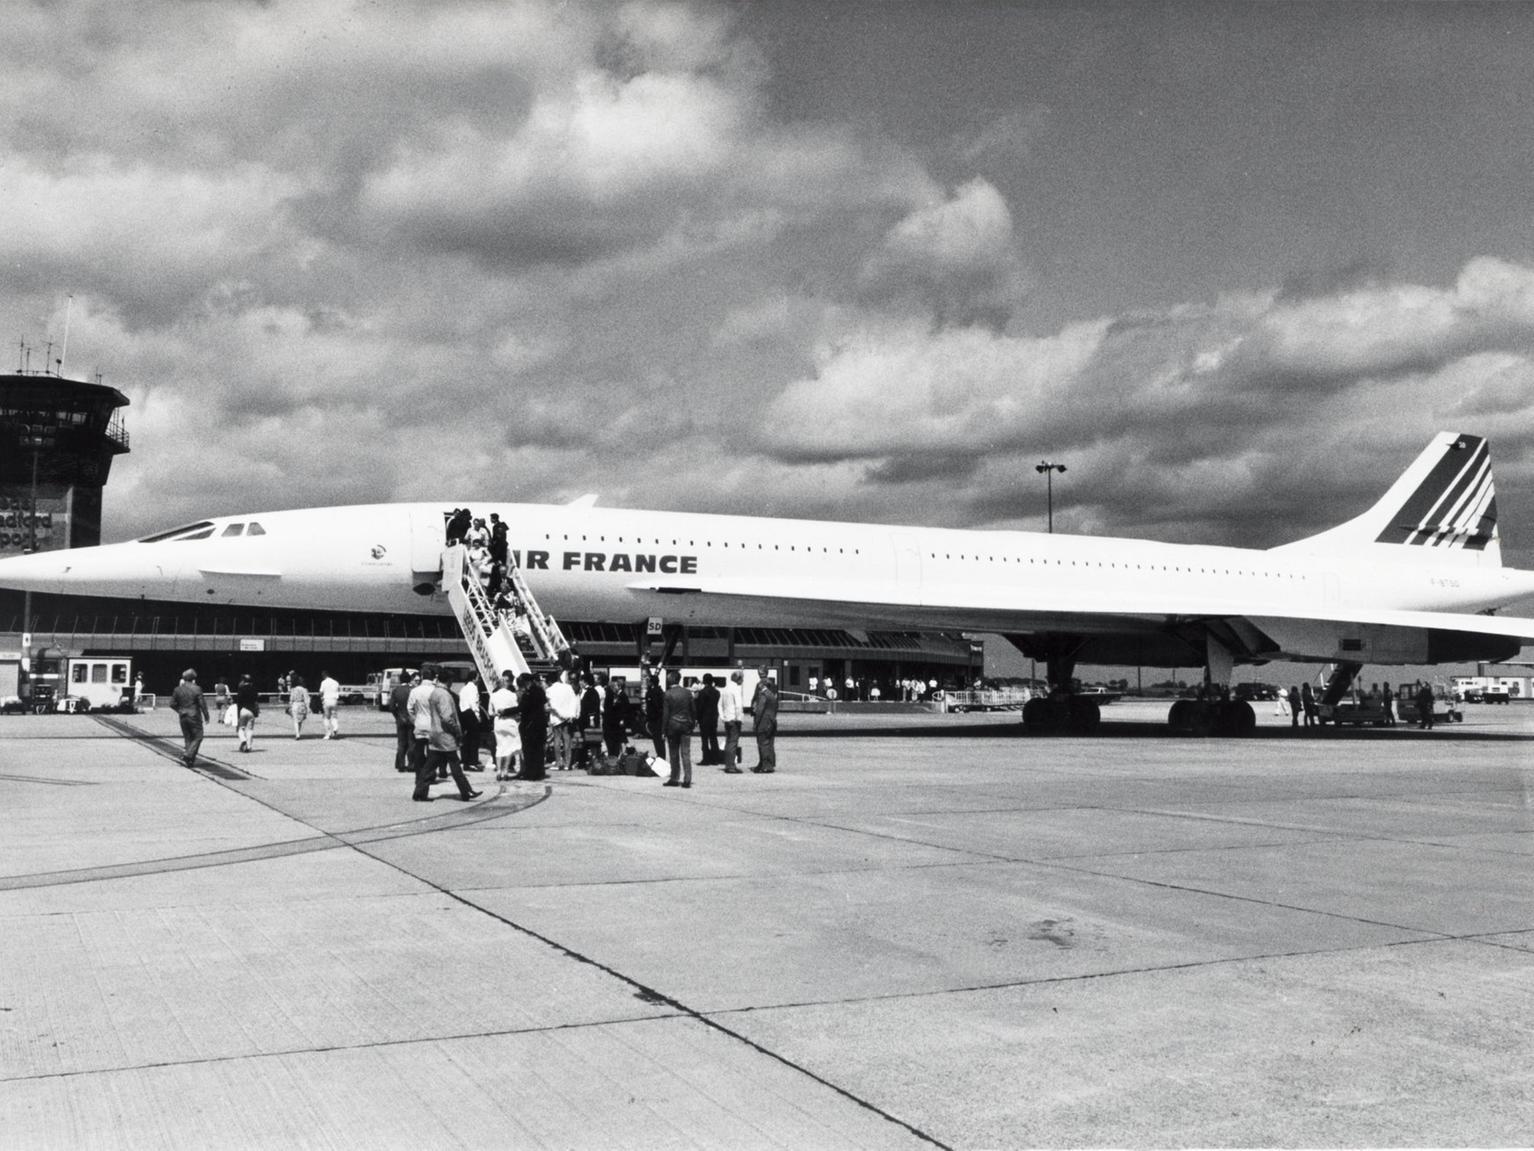 The Aire France Concorde passengers disembark in August 1986.